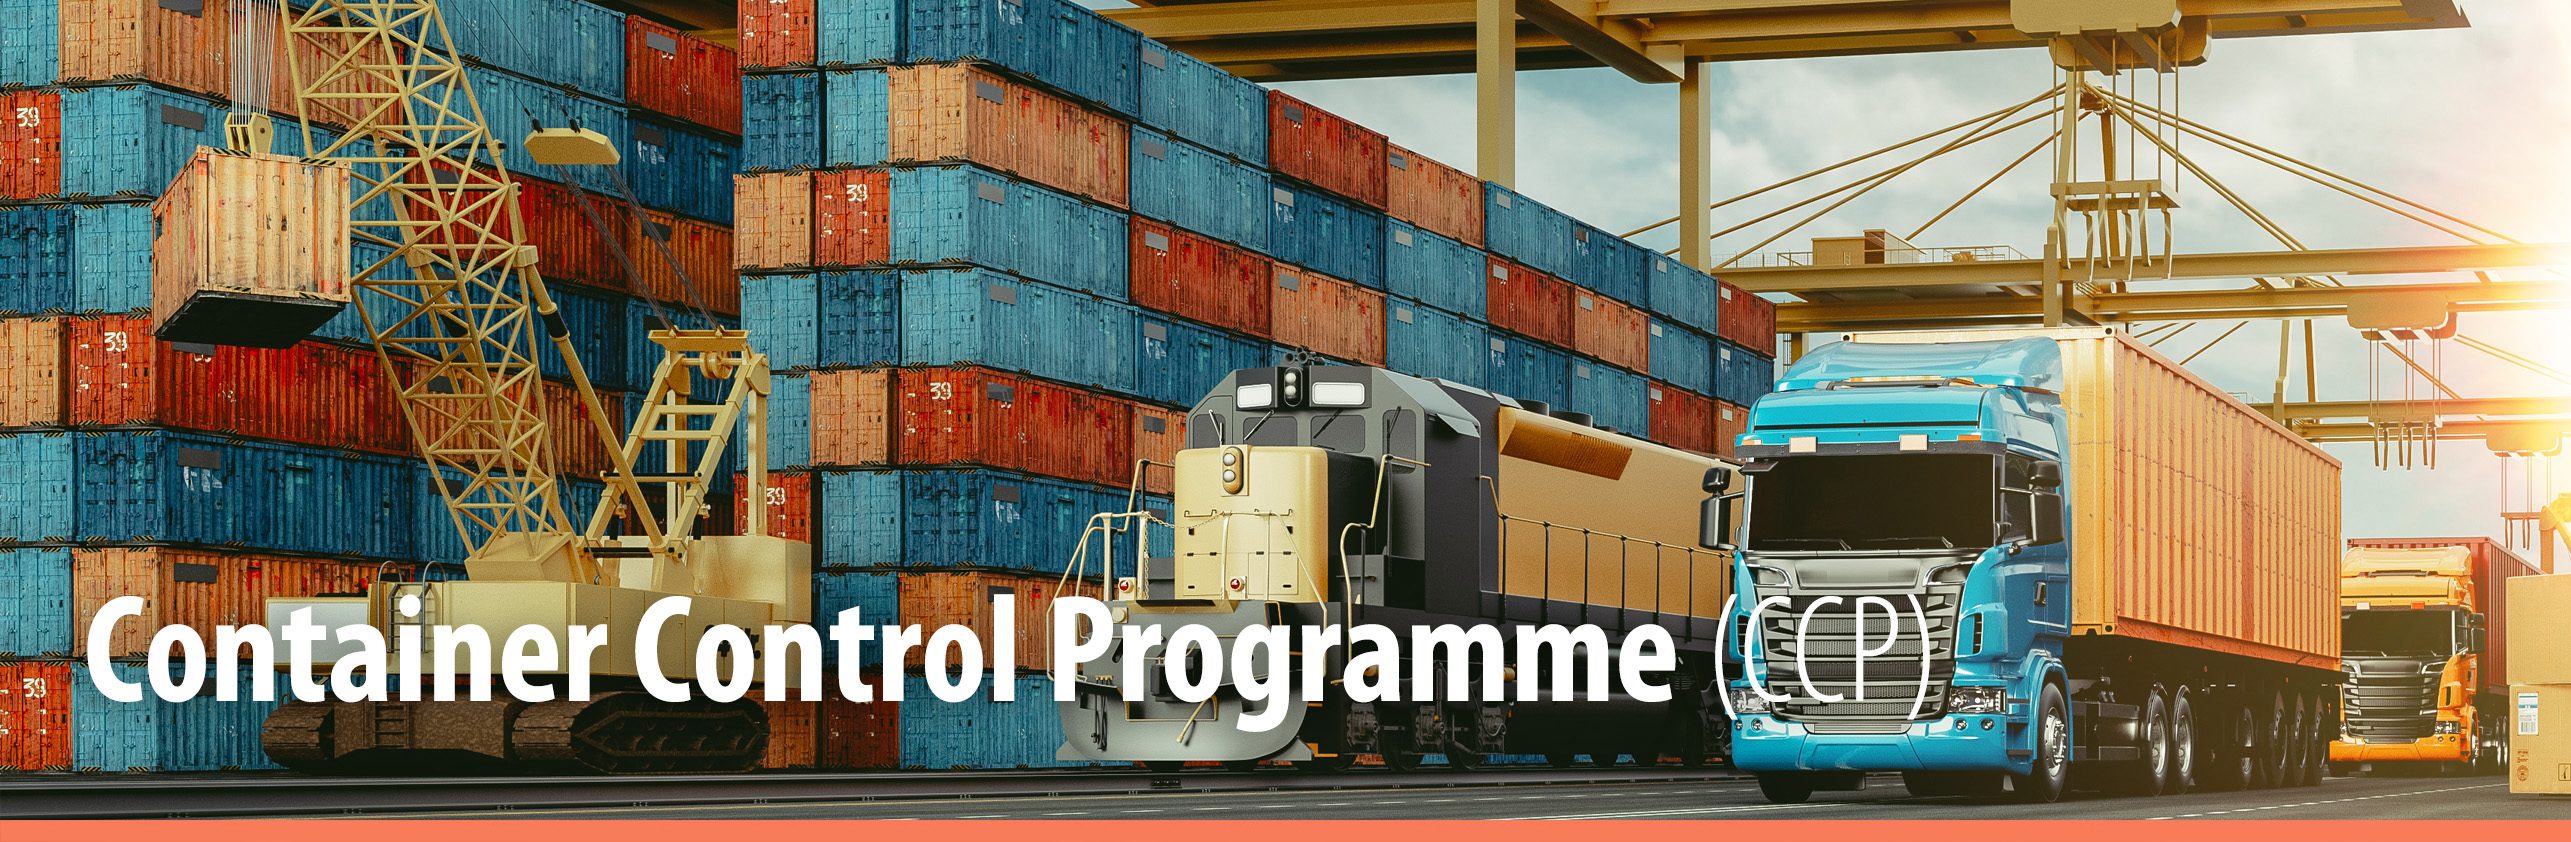 Container Control Programme